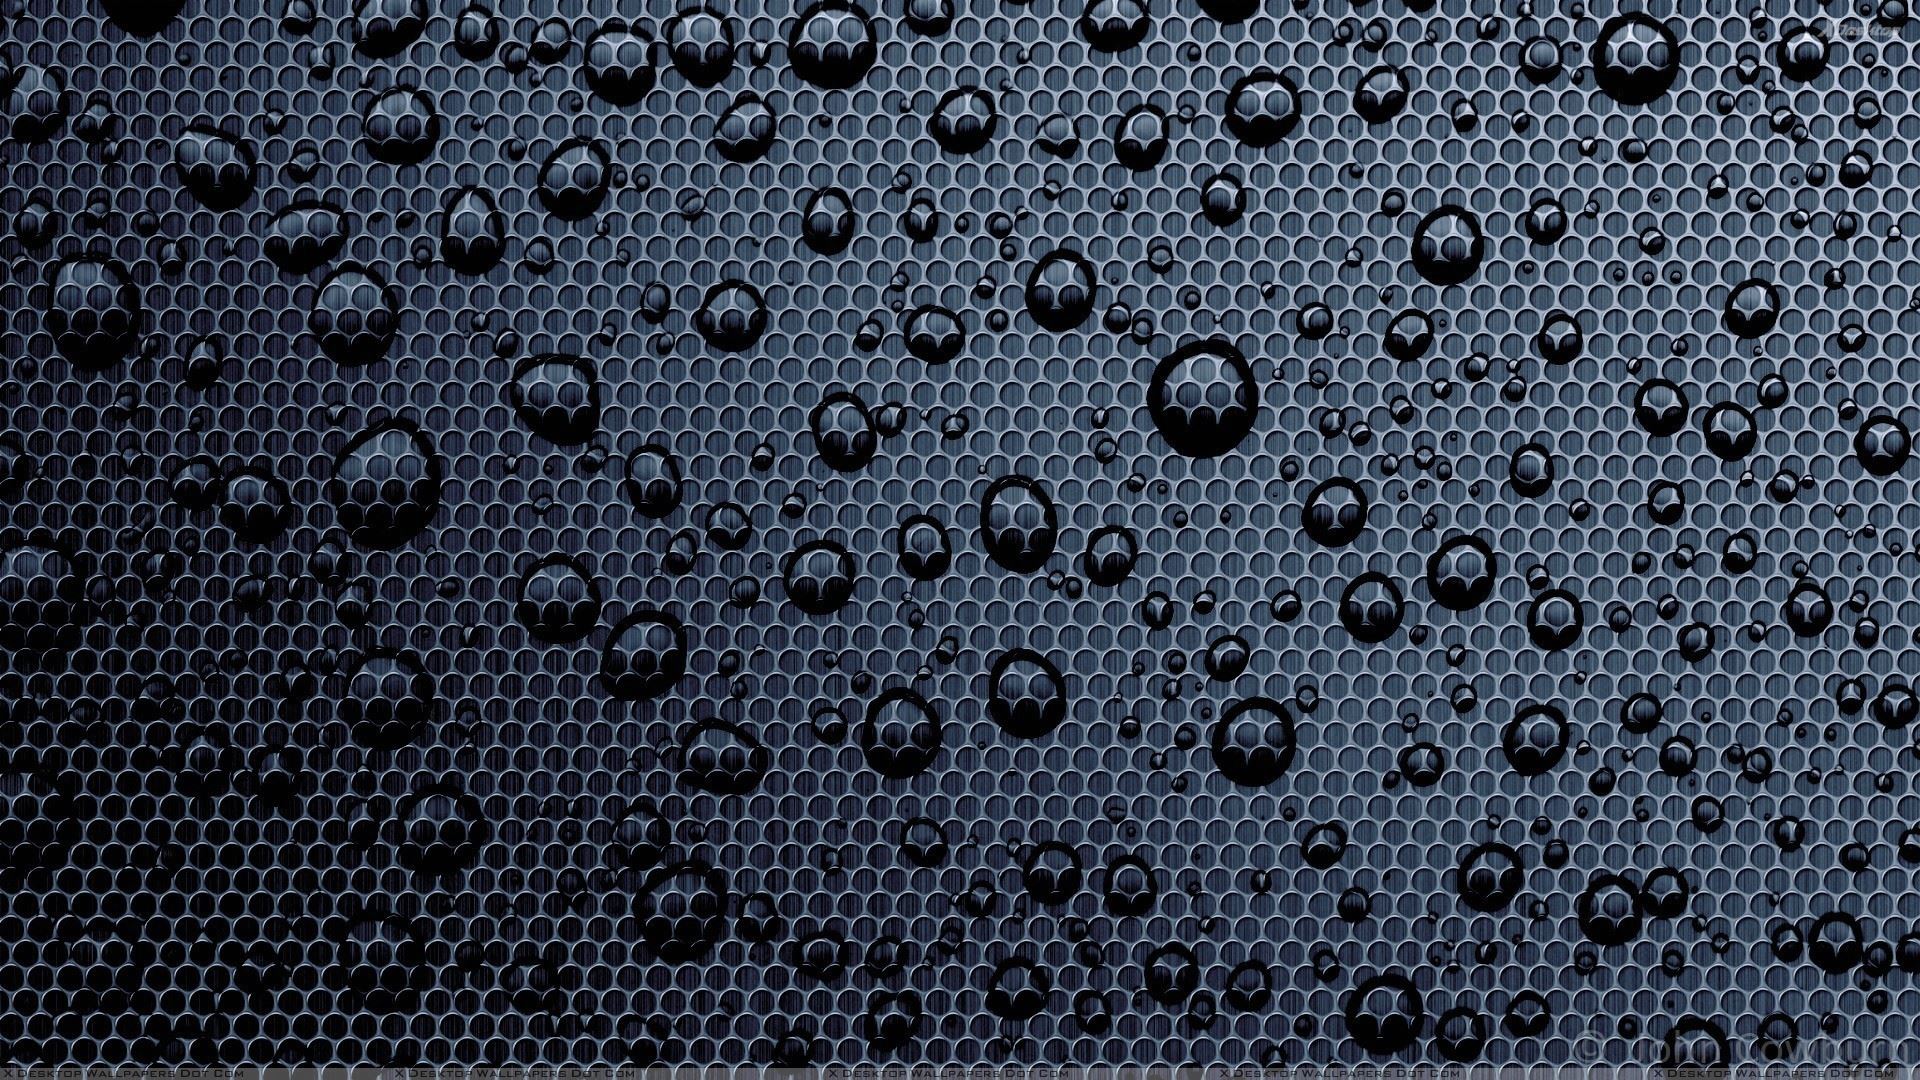 Water Drops On Black Circle Background Wallpaper